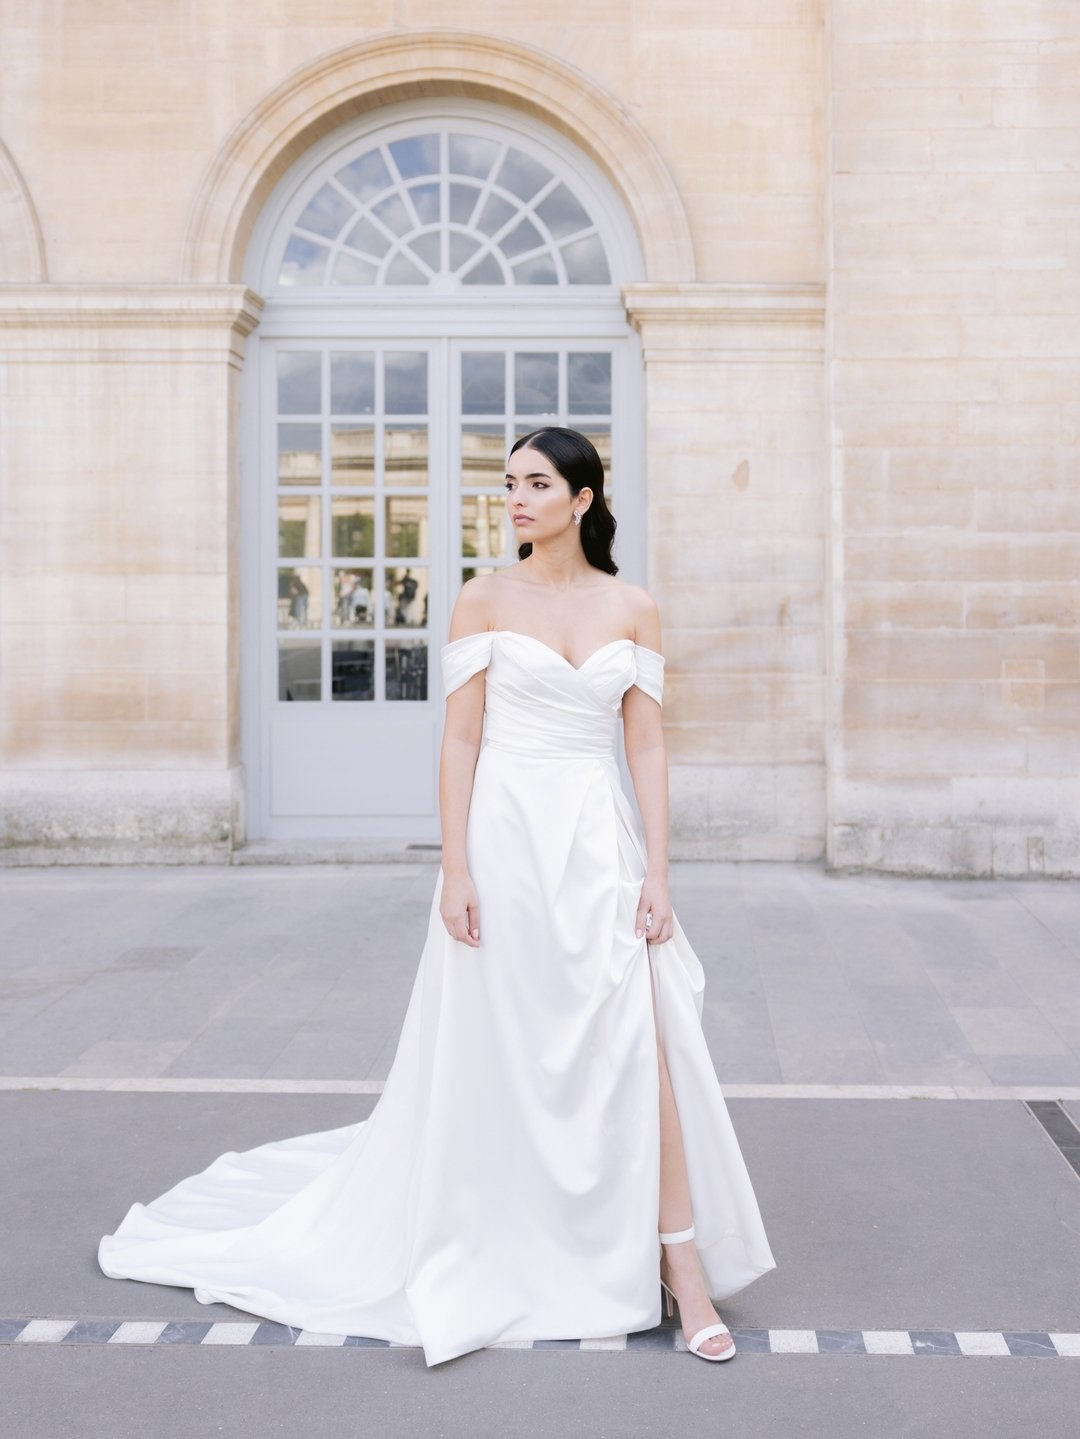 Sleek and polished locks, paired with a soft glam makeup and accent earrings - the perfect blend of modern elegance and glamour for my bride's destination wedding in Paris 😍

This look is not only popular but also IDEAL for brides who want to wear t